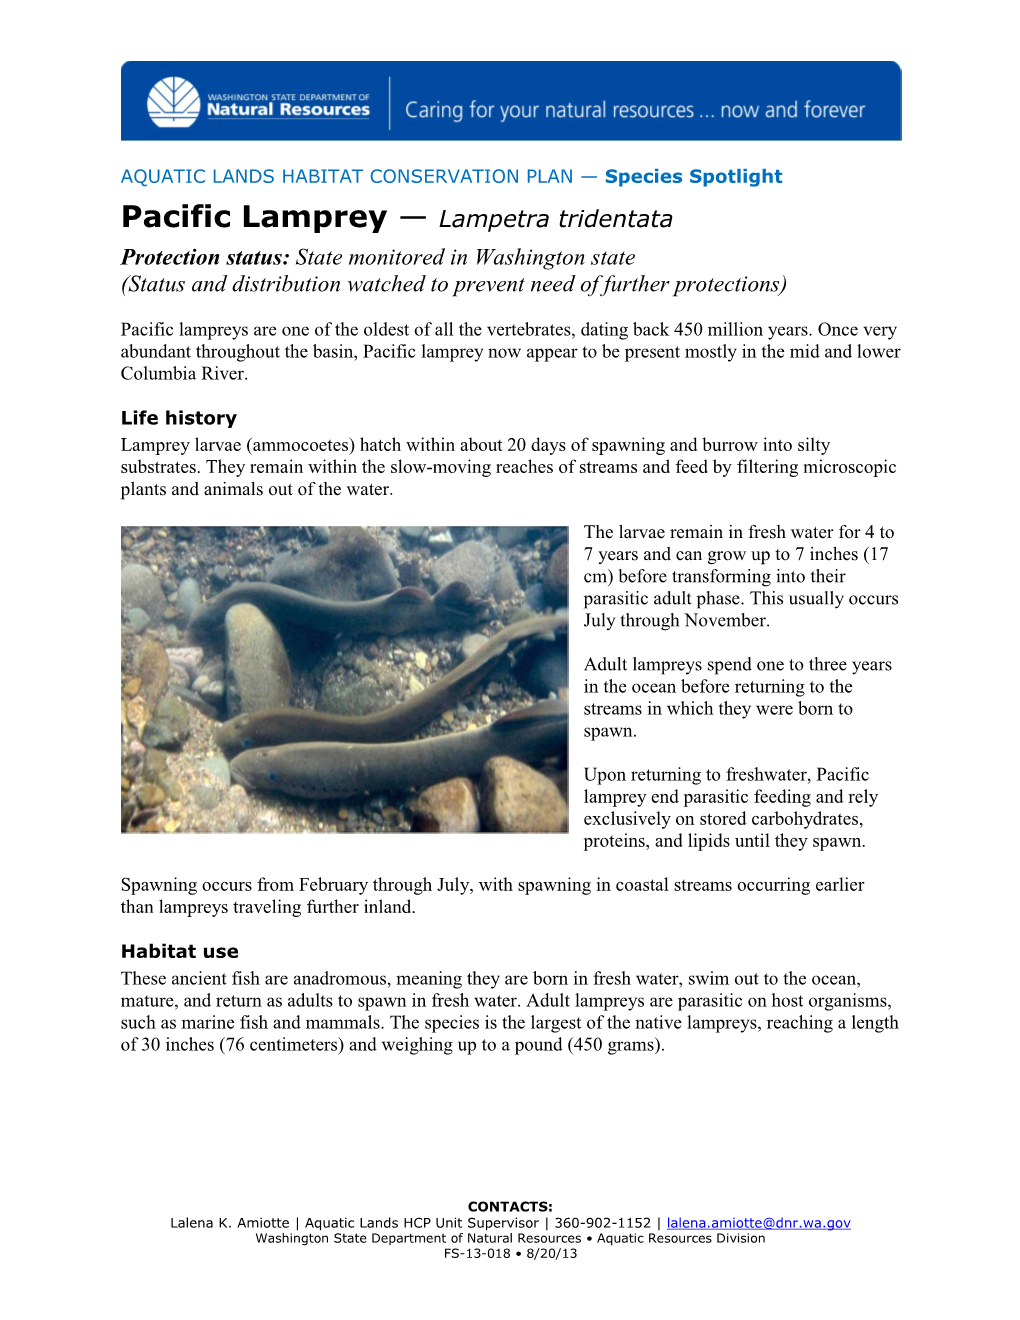 Pacific Lamprey — Lampetra Tridentata Protection Status: State Monitored in Washington State (Status and Distribution Watched to Prevent Need of Further Protections)